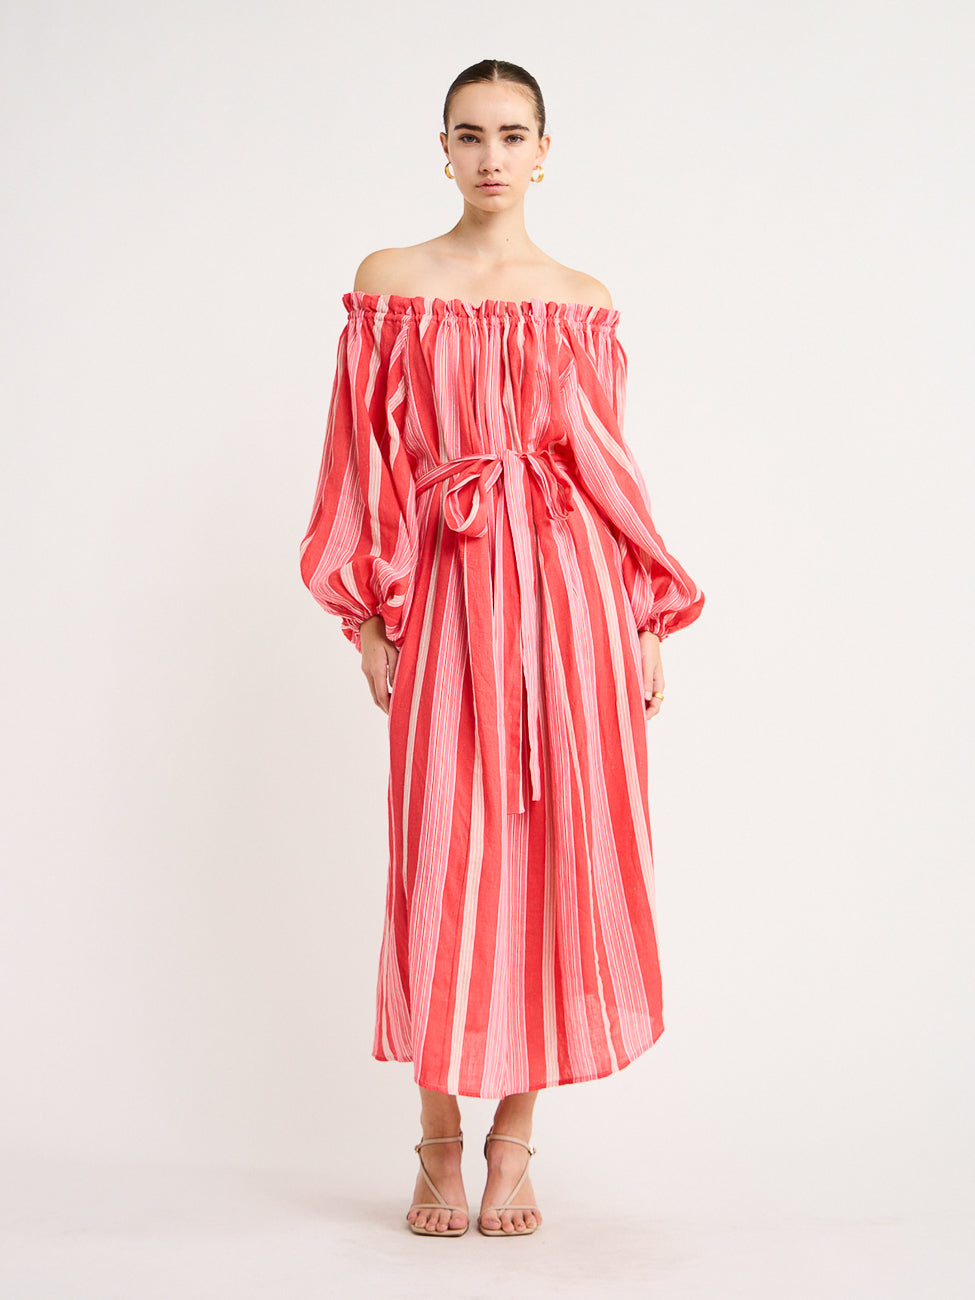 Palm Noosa Sicily Dress in Pink & Red Stripe – Coco & Lola